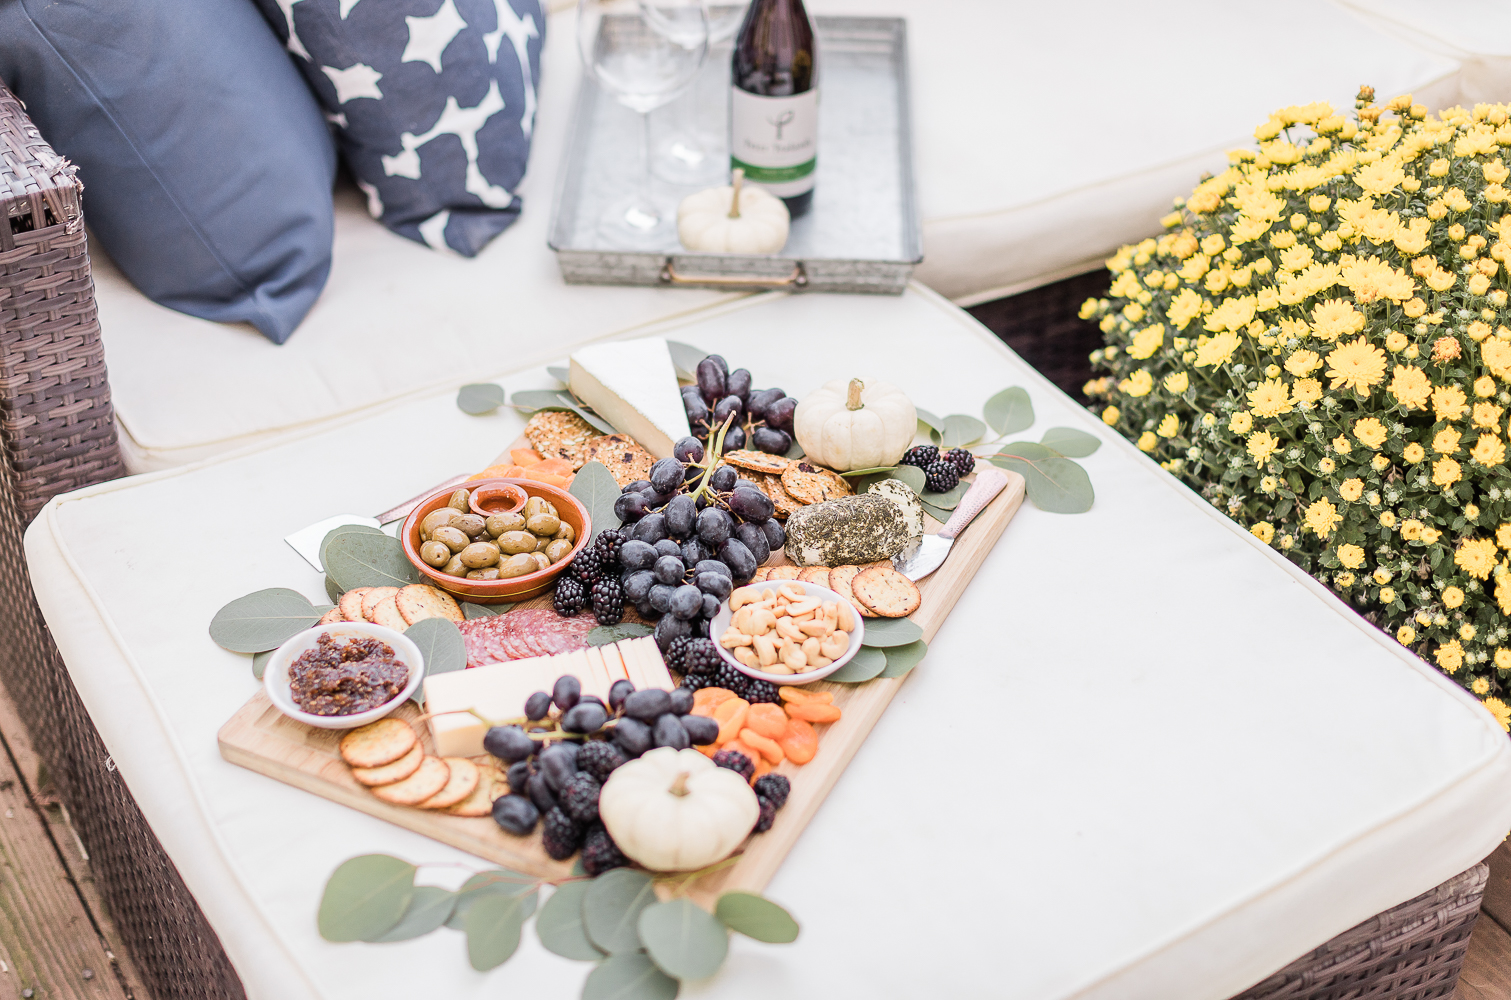 Fall cheese board created by blogger Stephanie Ziajka on Diary of a Debutante